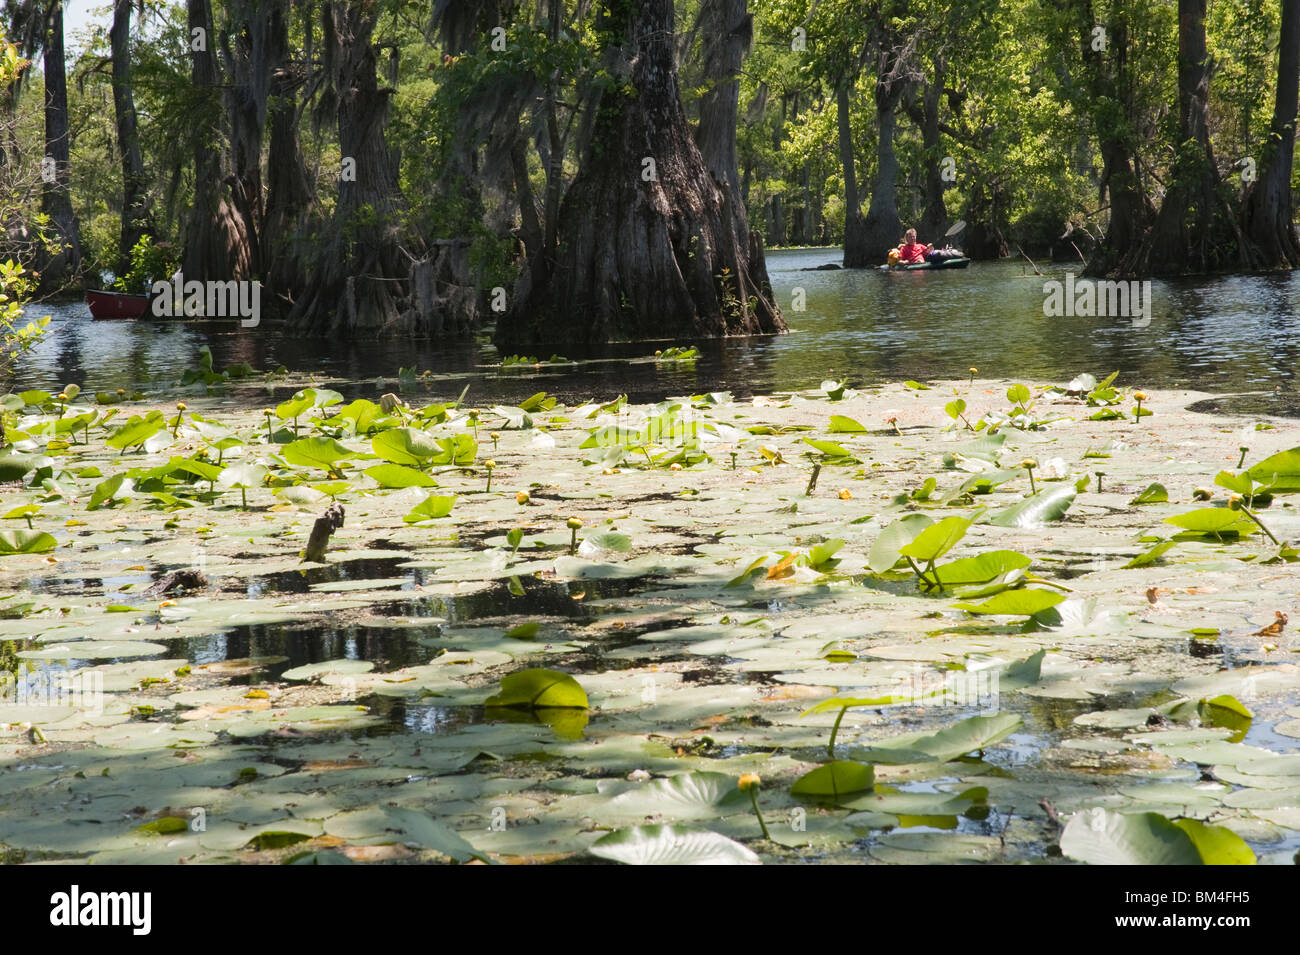 Bald cypress trees and spatterdock plant Nuphar luteum lutea at Merchants Millpond State Park North Carolina USA Stock Photo